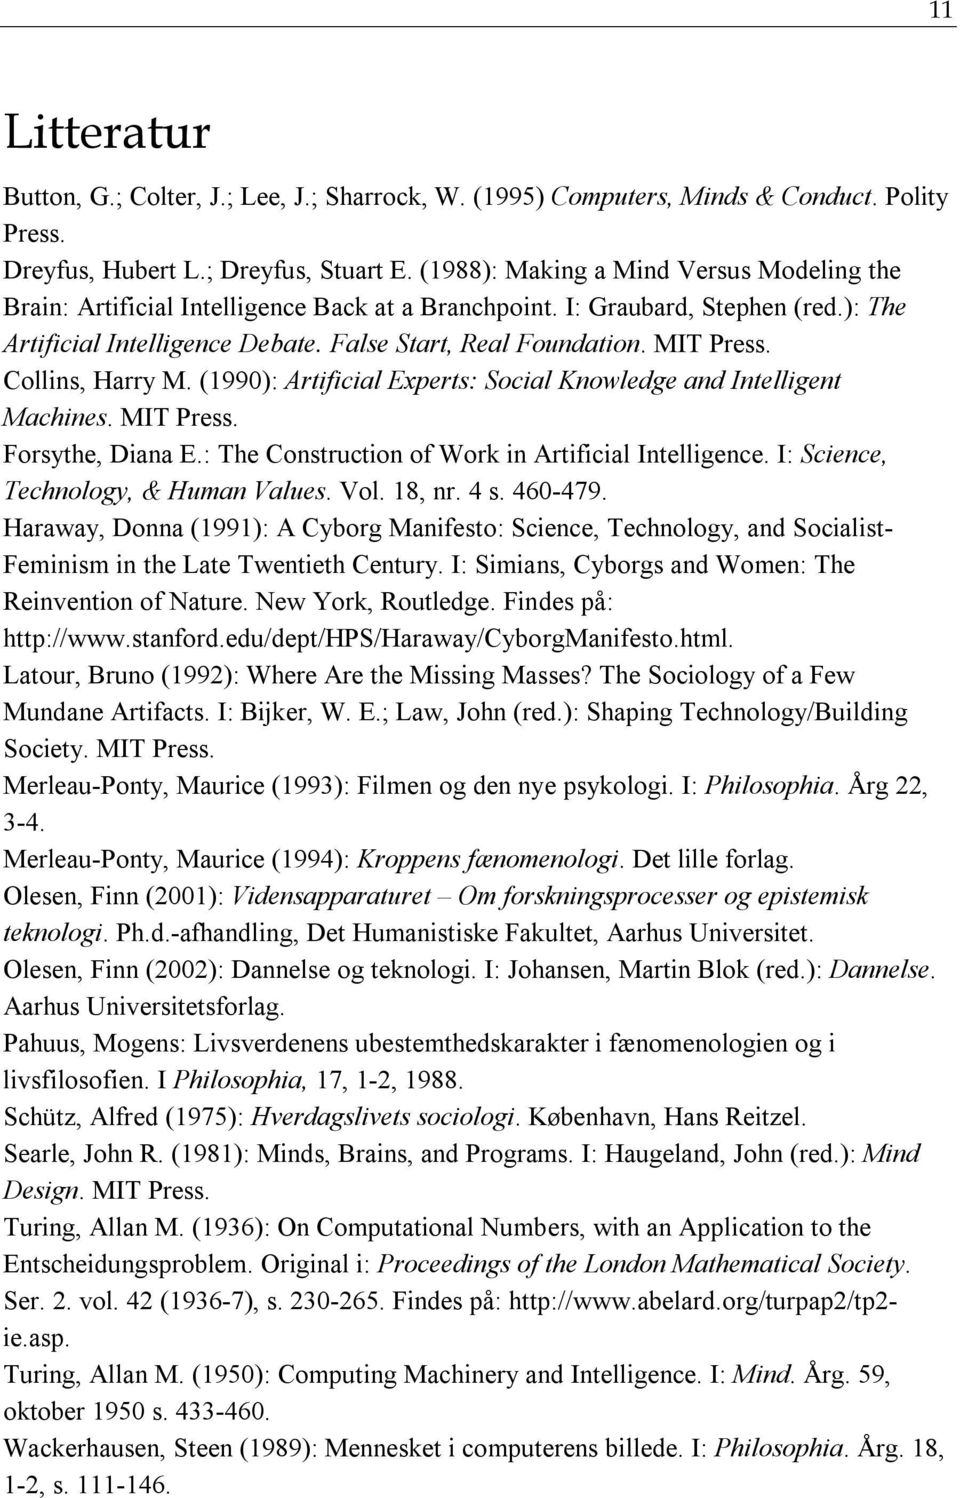 MIT Press. Collins, Harry M. (1990): Artificial Experts: Social Knowledge and Intelligent Machines. MIT Press. Forsythe, Diana E.: The Construction of Work in Artificial Intelligence.